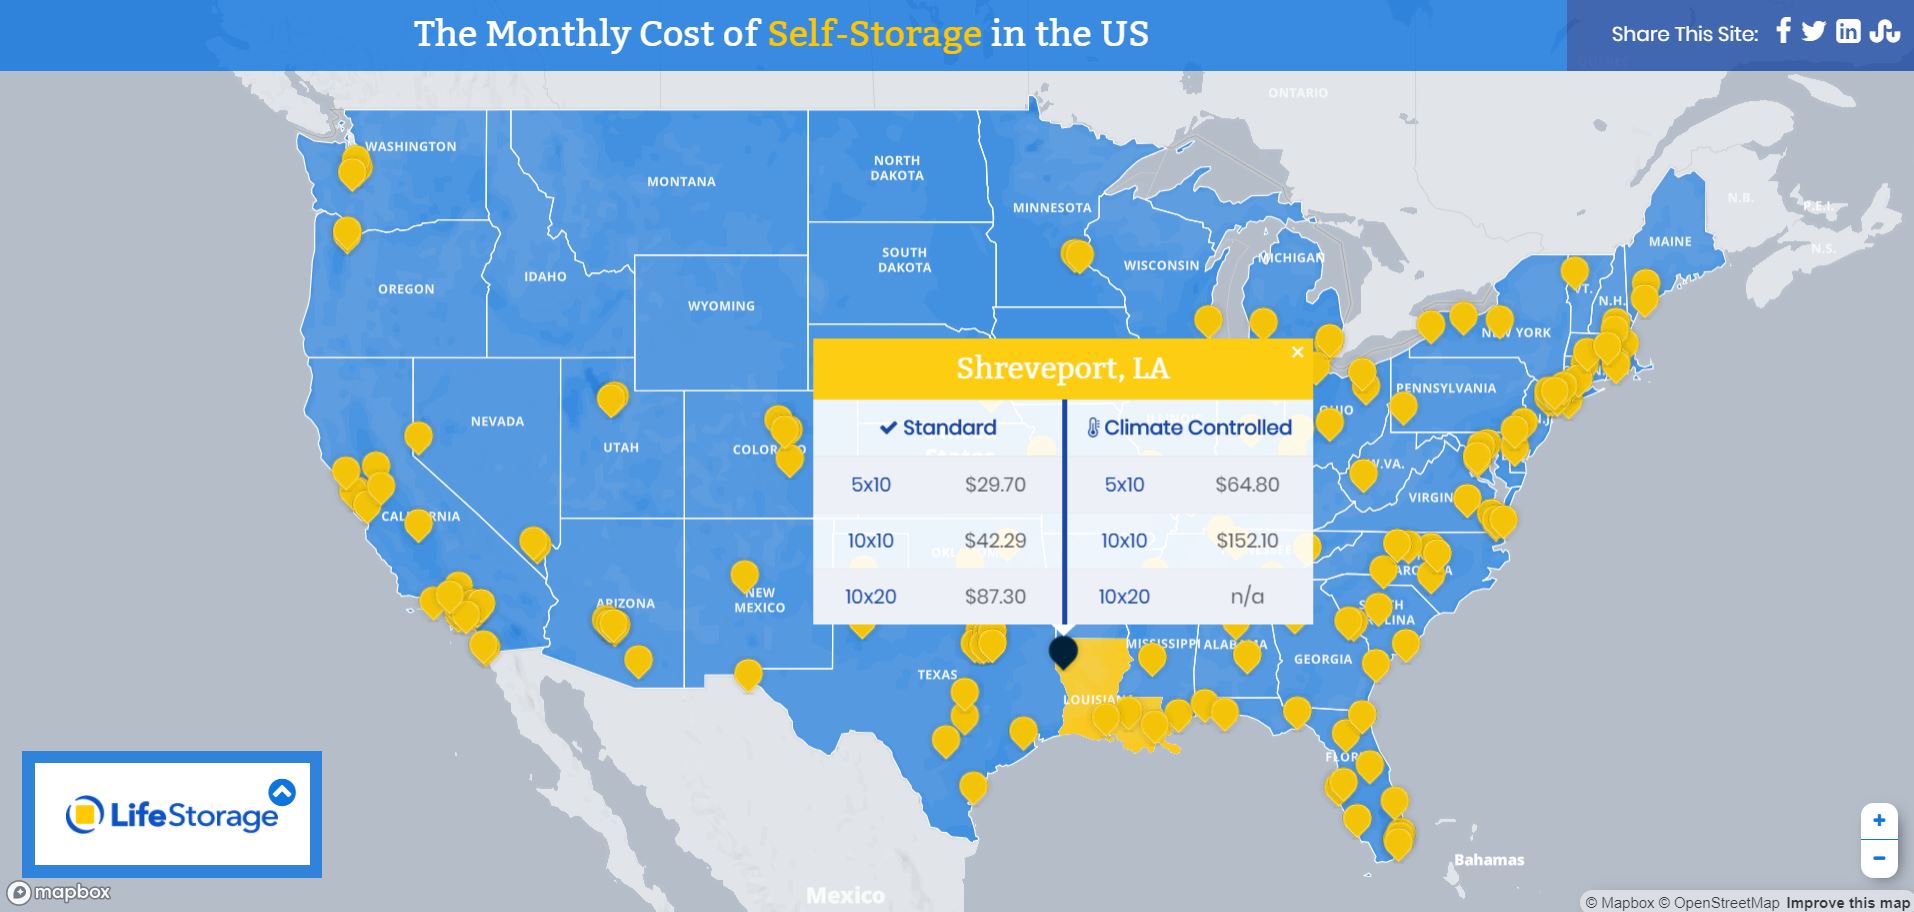 Cost of Self-Storage Units in 2018 in the Untied States of America